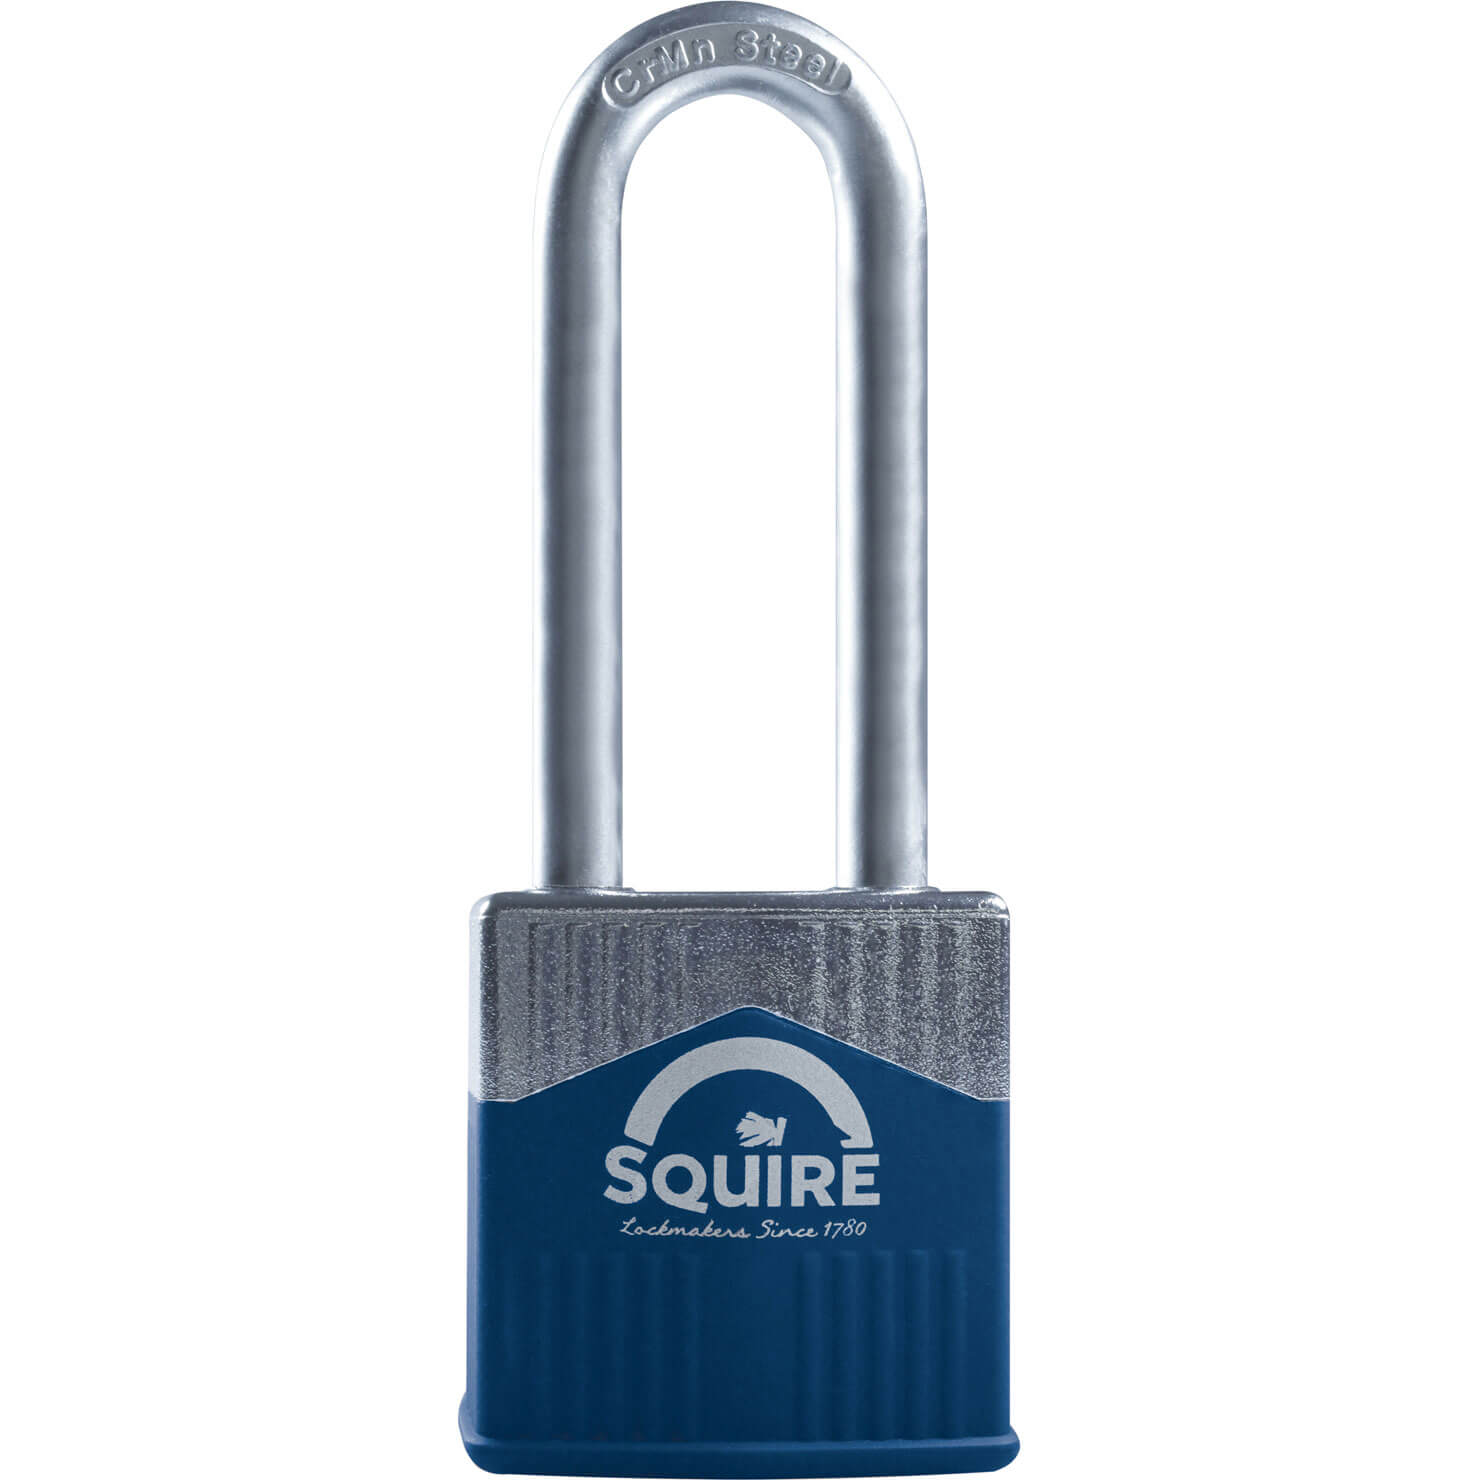 Image of Henry Squire Warrior High-Security Shackle Padlock 45mm Long